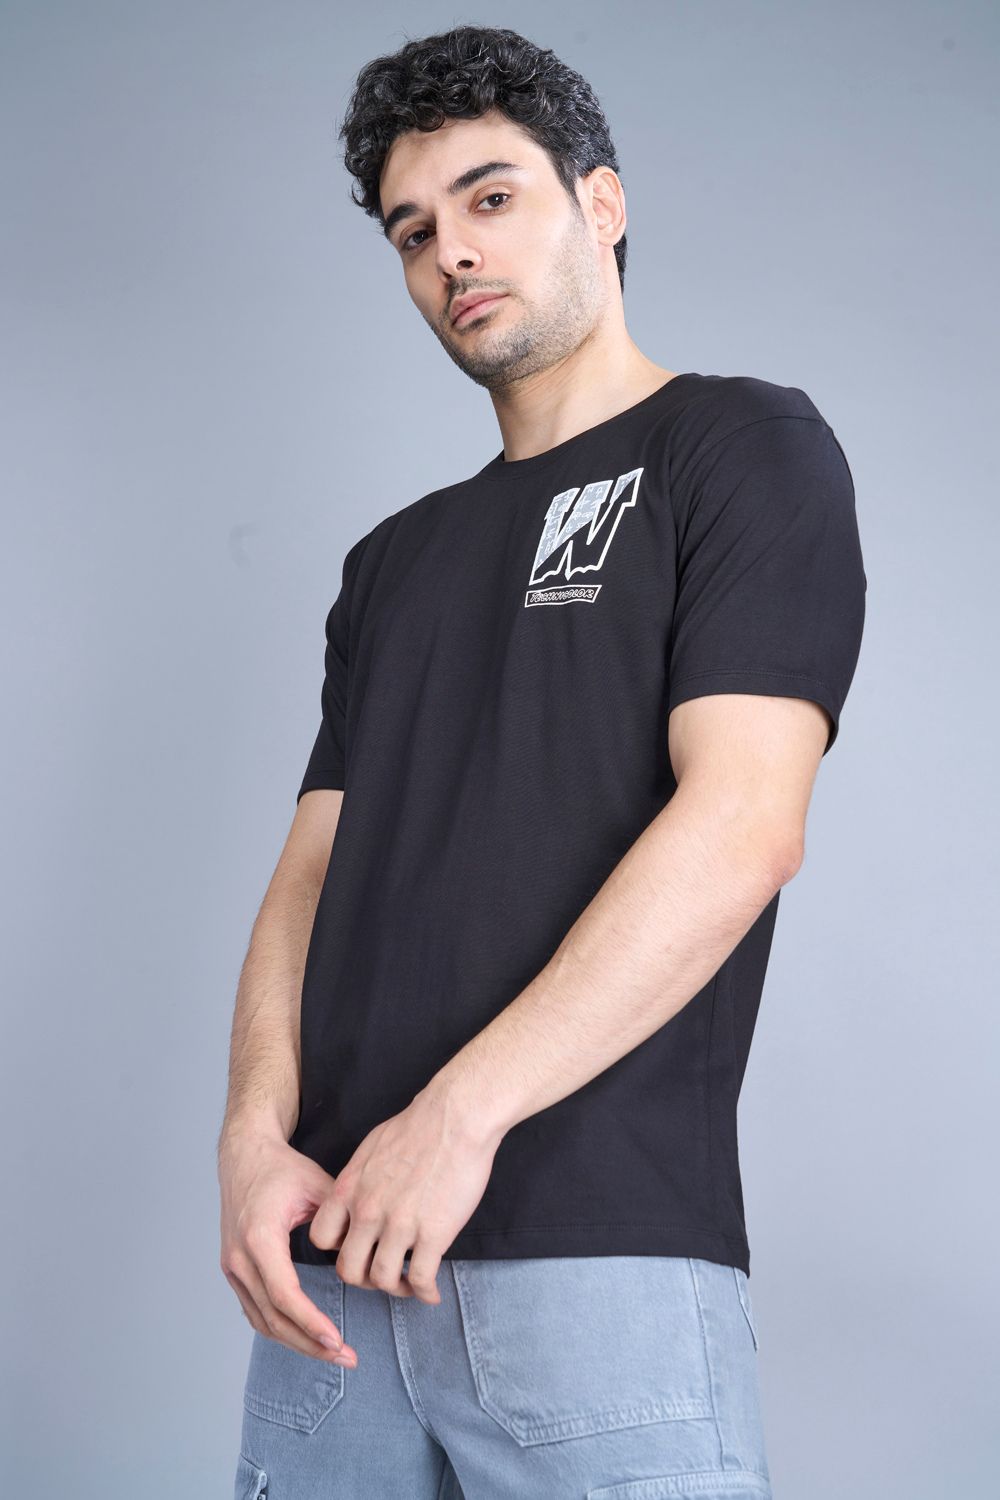 Cotton oversized T shirt for men in the solid color black with half sleeves and crew neck, side view.